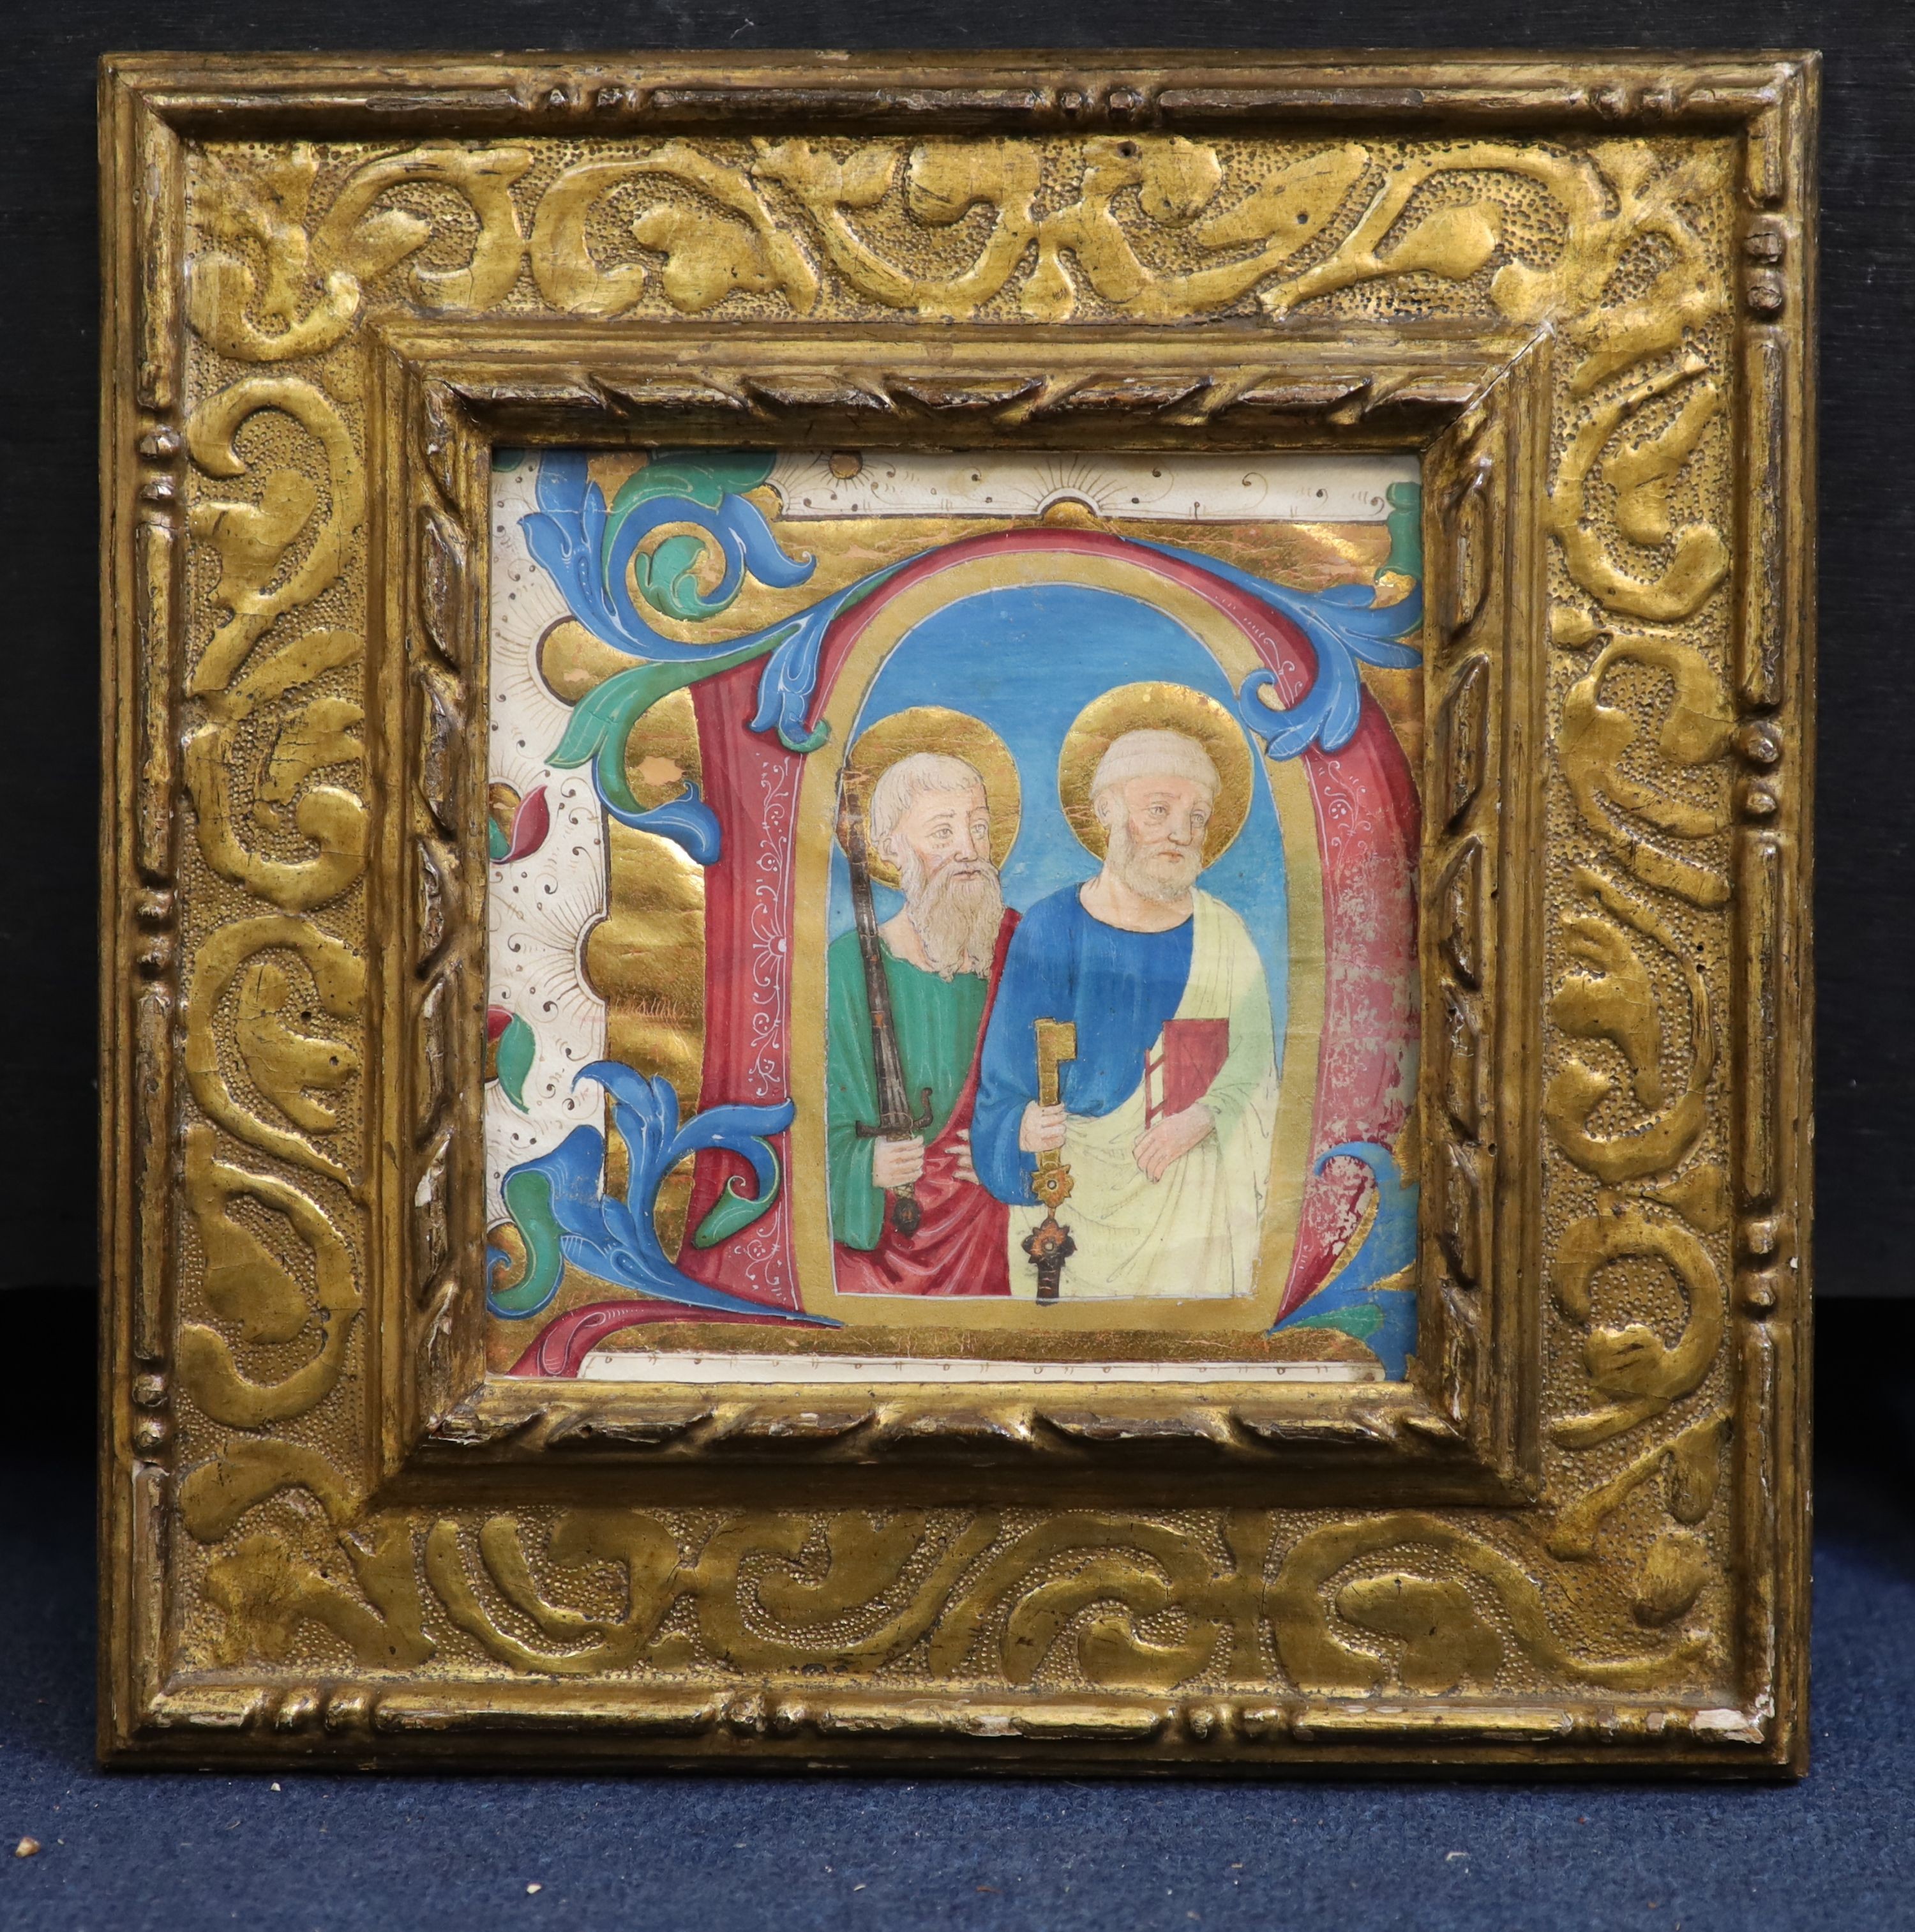 Late 15th Century Italian School, probably Florence, Saints Peter and Paul, Historiated D. from an Antiphonal, illuminated miniature on vellum, 16 x 16cm